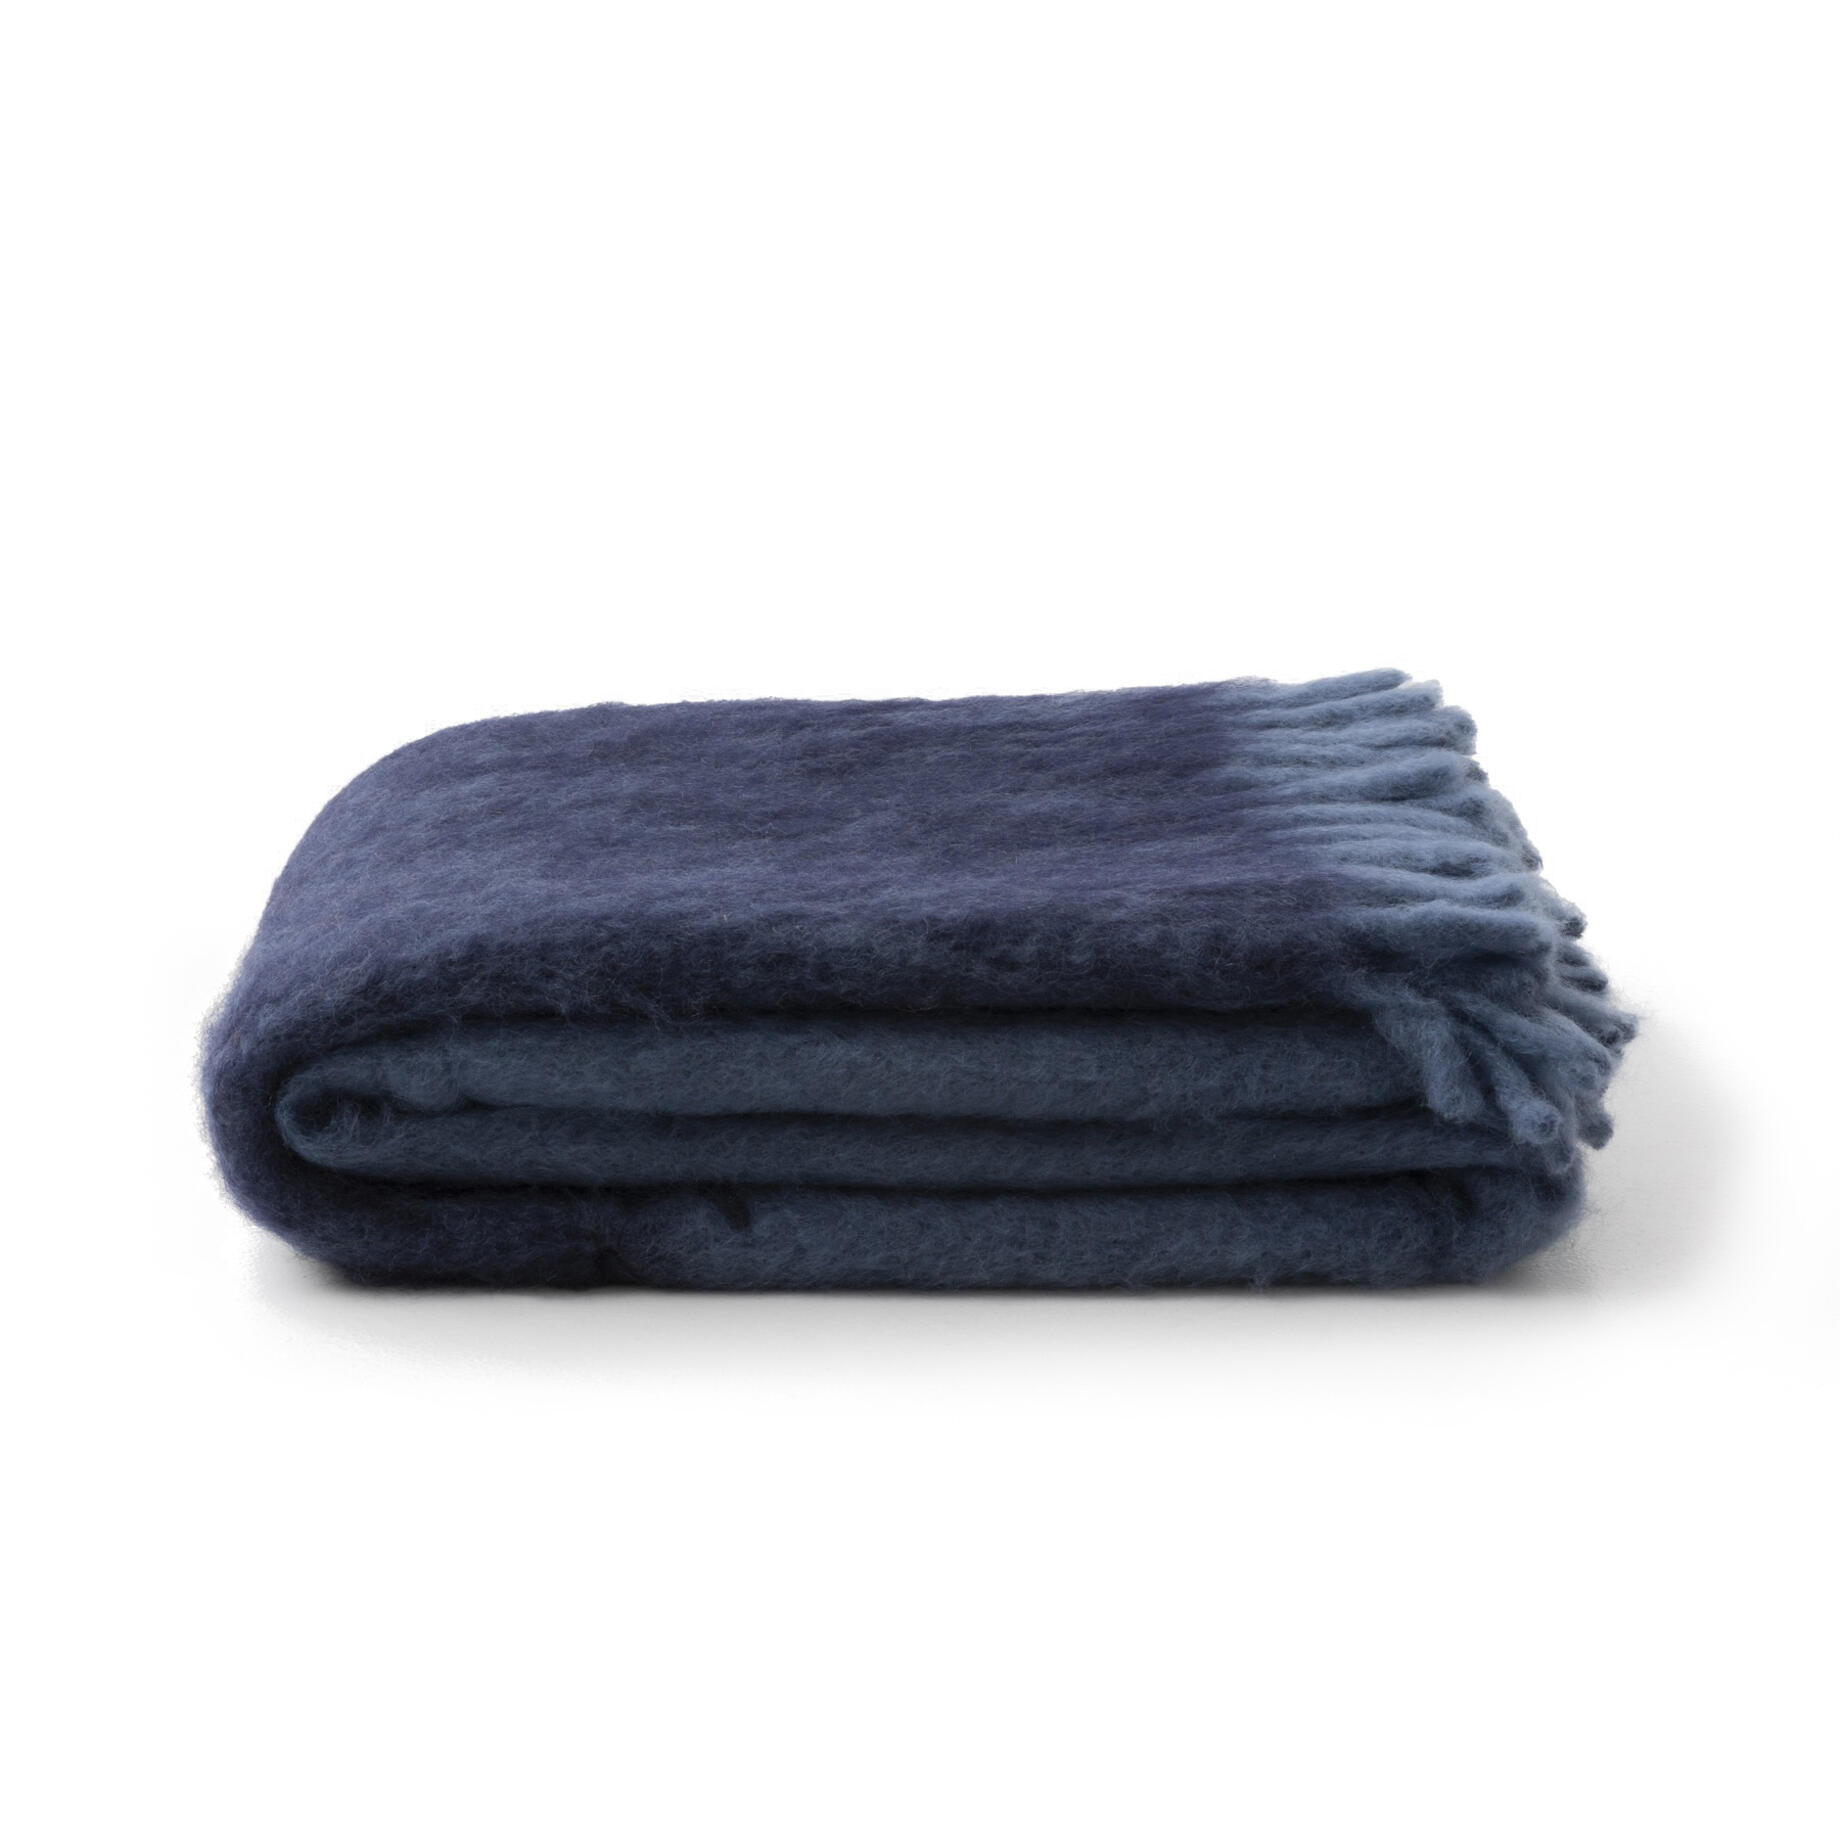 Mohair And Wool Throw, Suede Stitching, Blue